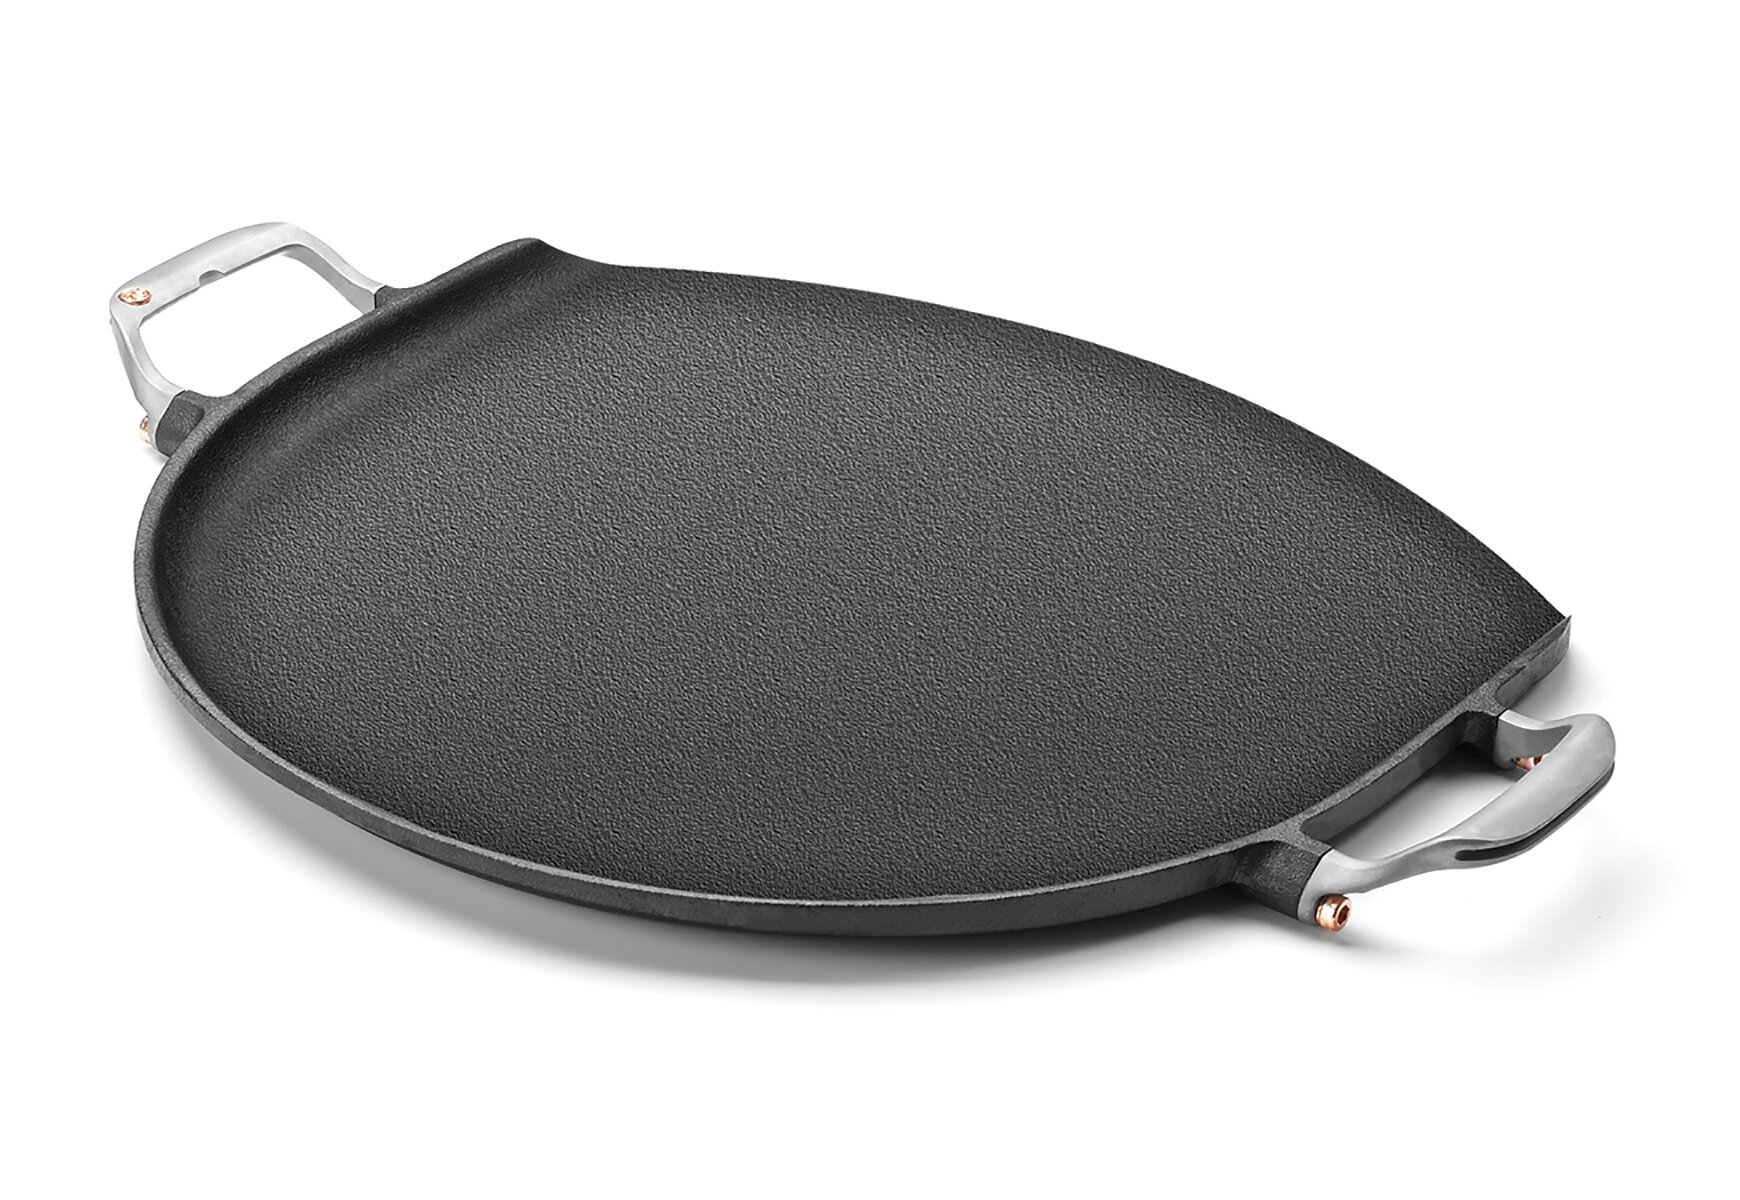 Cast Iron Pizza Pan-14 Inches Skillet for Cooking, Baking, Grilling-Durable  by Home-Complete